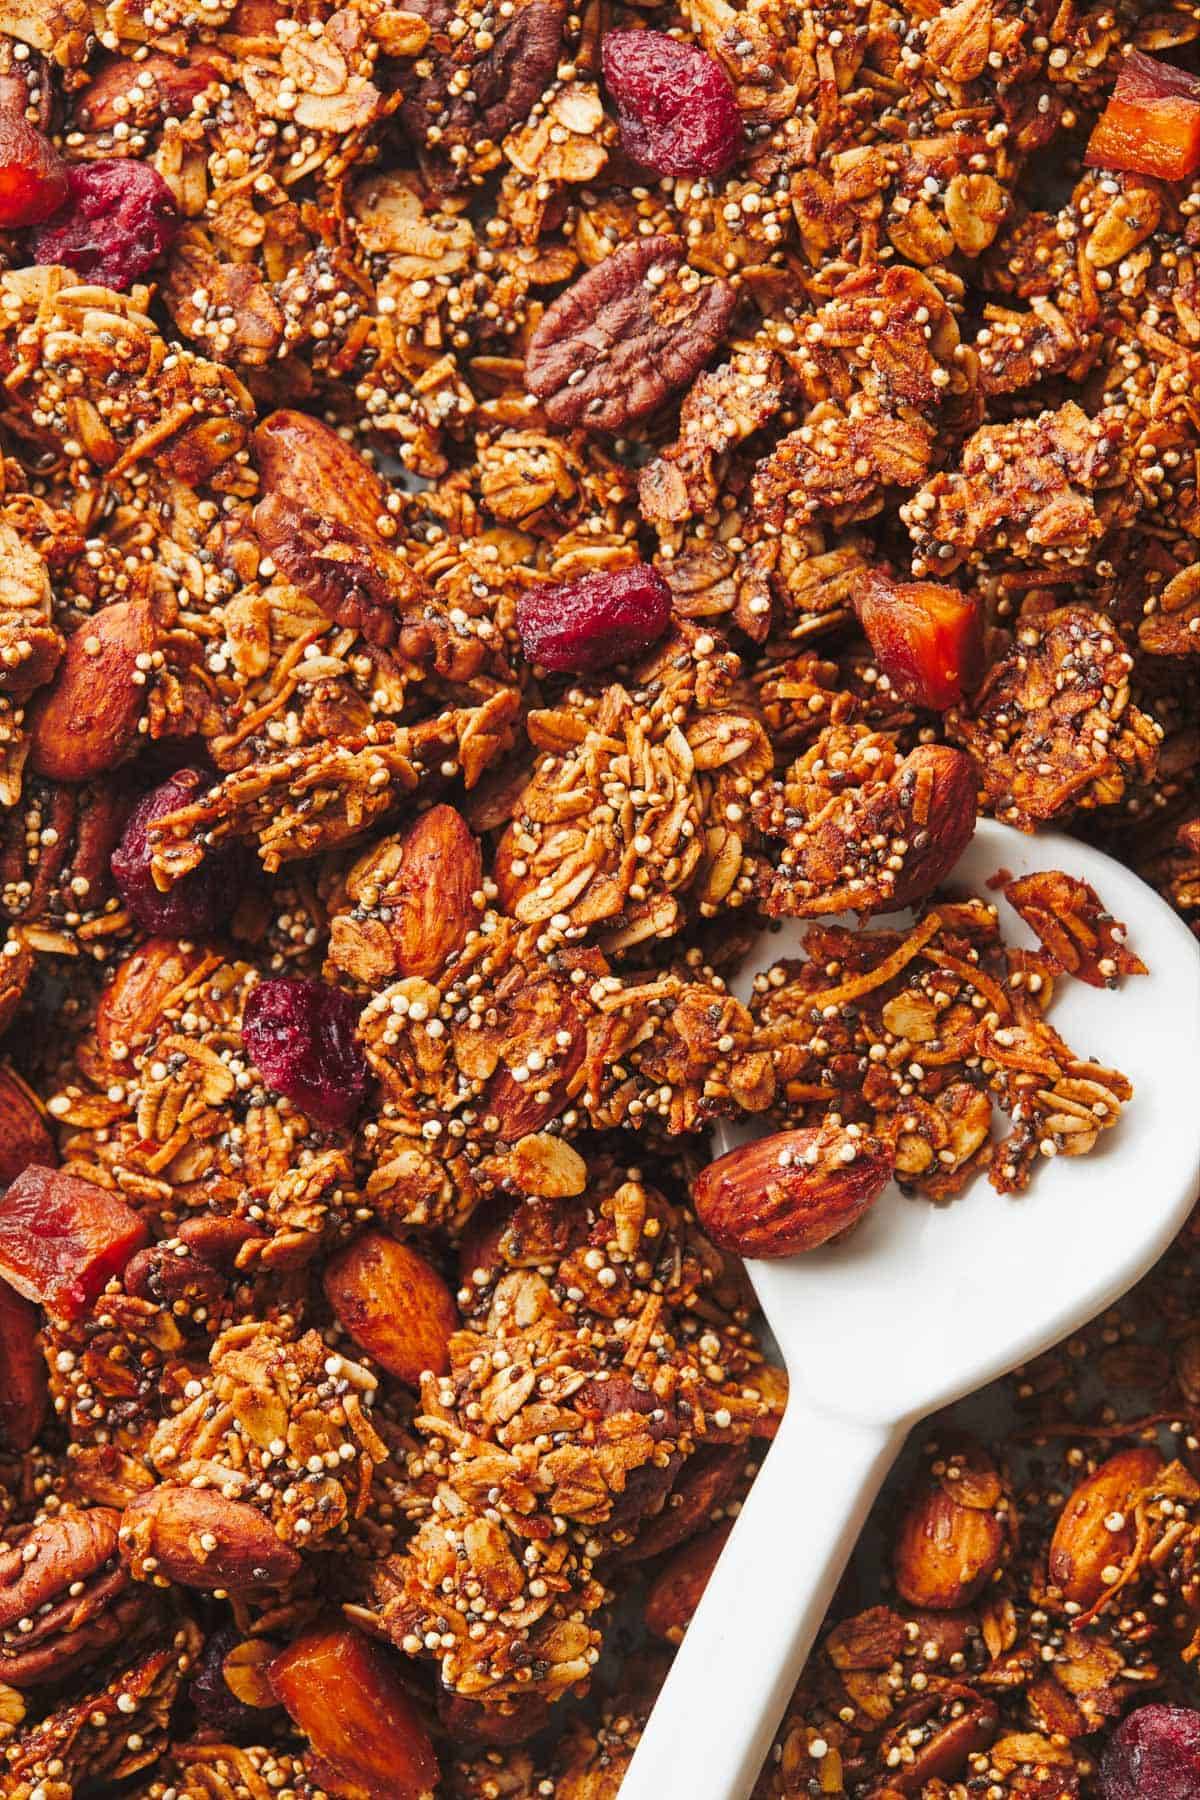 A spoon in a pile of granola full of nuts, oats, quinoa, and cranberries.